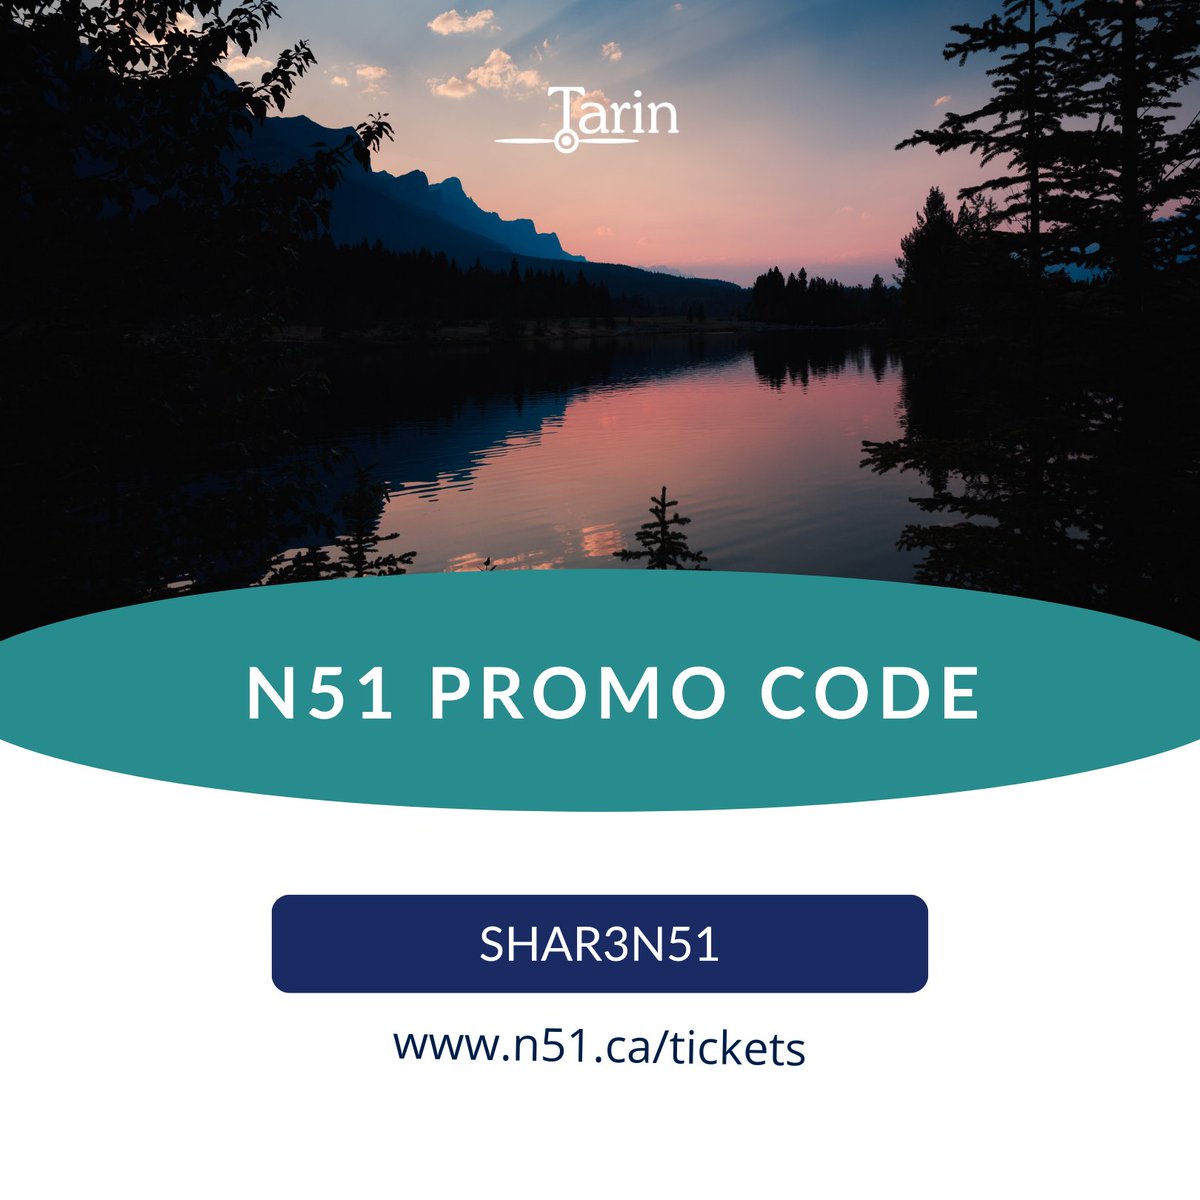 The @N51Conference is days away, and we're thrilled to be attending. 🙌 If you haven't secured your tickets yet, now's the perfect time to do so! Register now at n51.ca/tickets using code SHAR3N51 to get $250 off your ticket. #N51 #Geospatial #LastChance #Conference